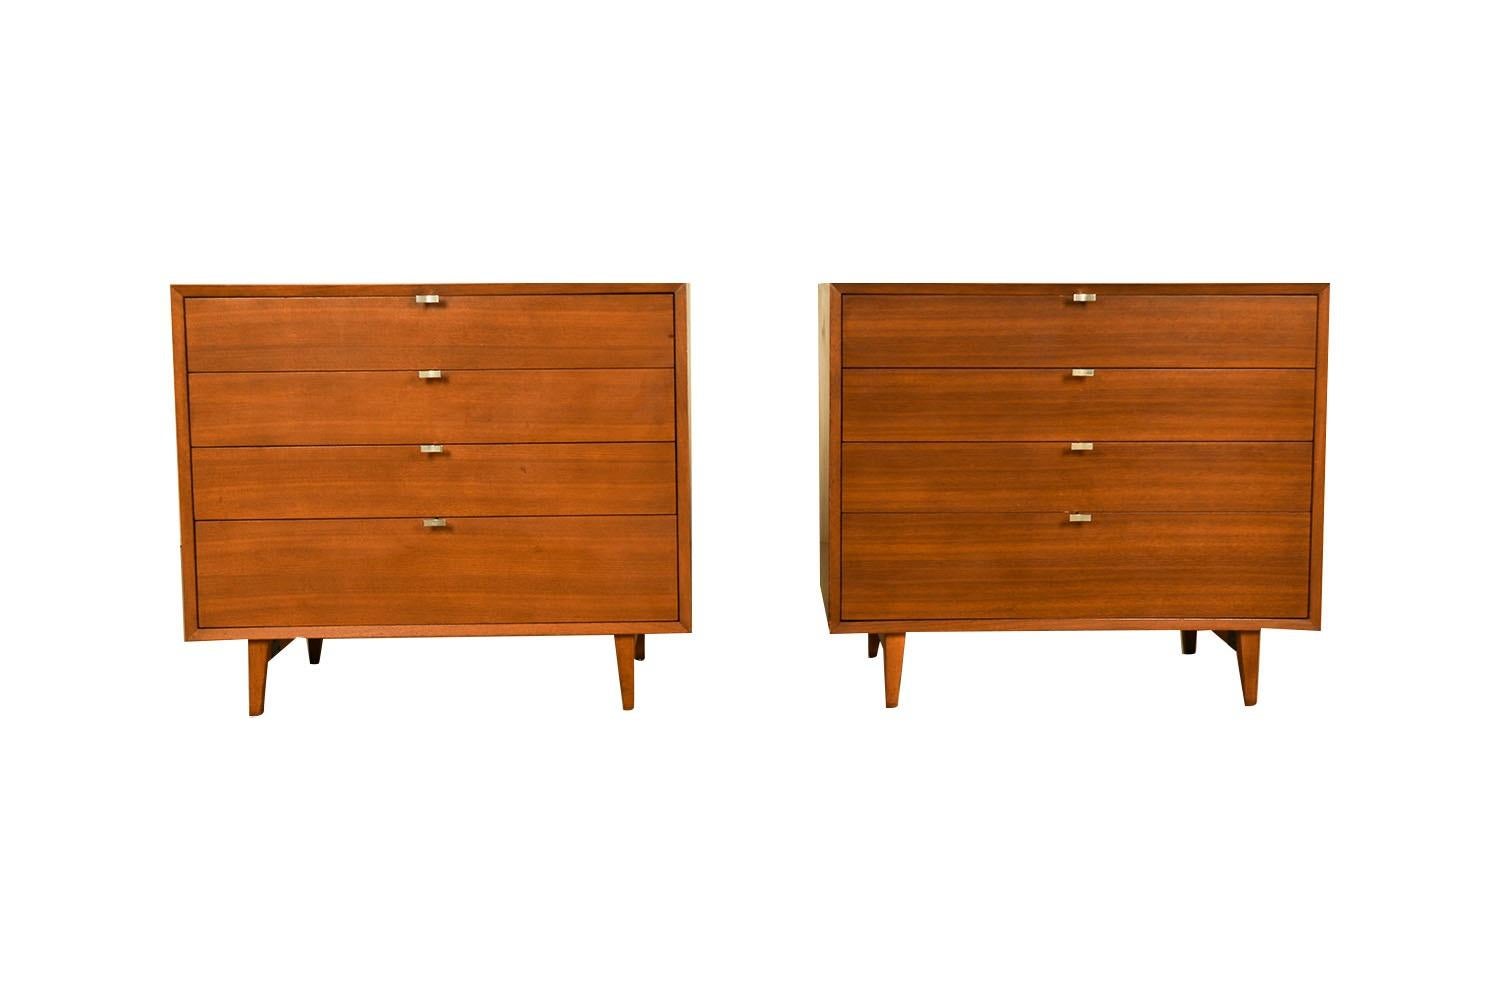 Remarkably iconic rare pair of walnut Mid-Century cabinets/ dressers by Florence Knoll, for Knoll inc., ca. 1960’s. A beautiful example of Mid-Century craftsmanship. Expertly crafted, these absolute jewels remain in clean vintage condition. Each